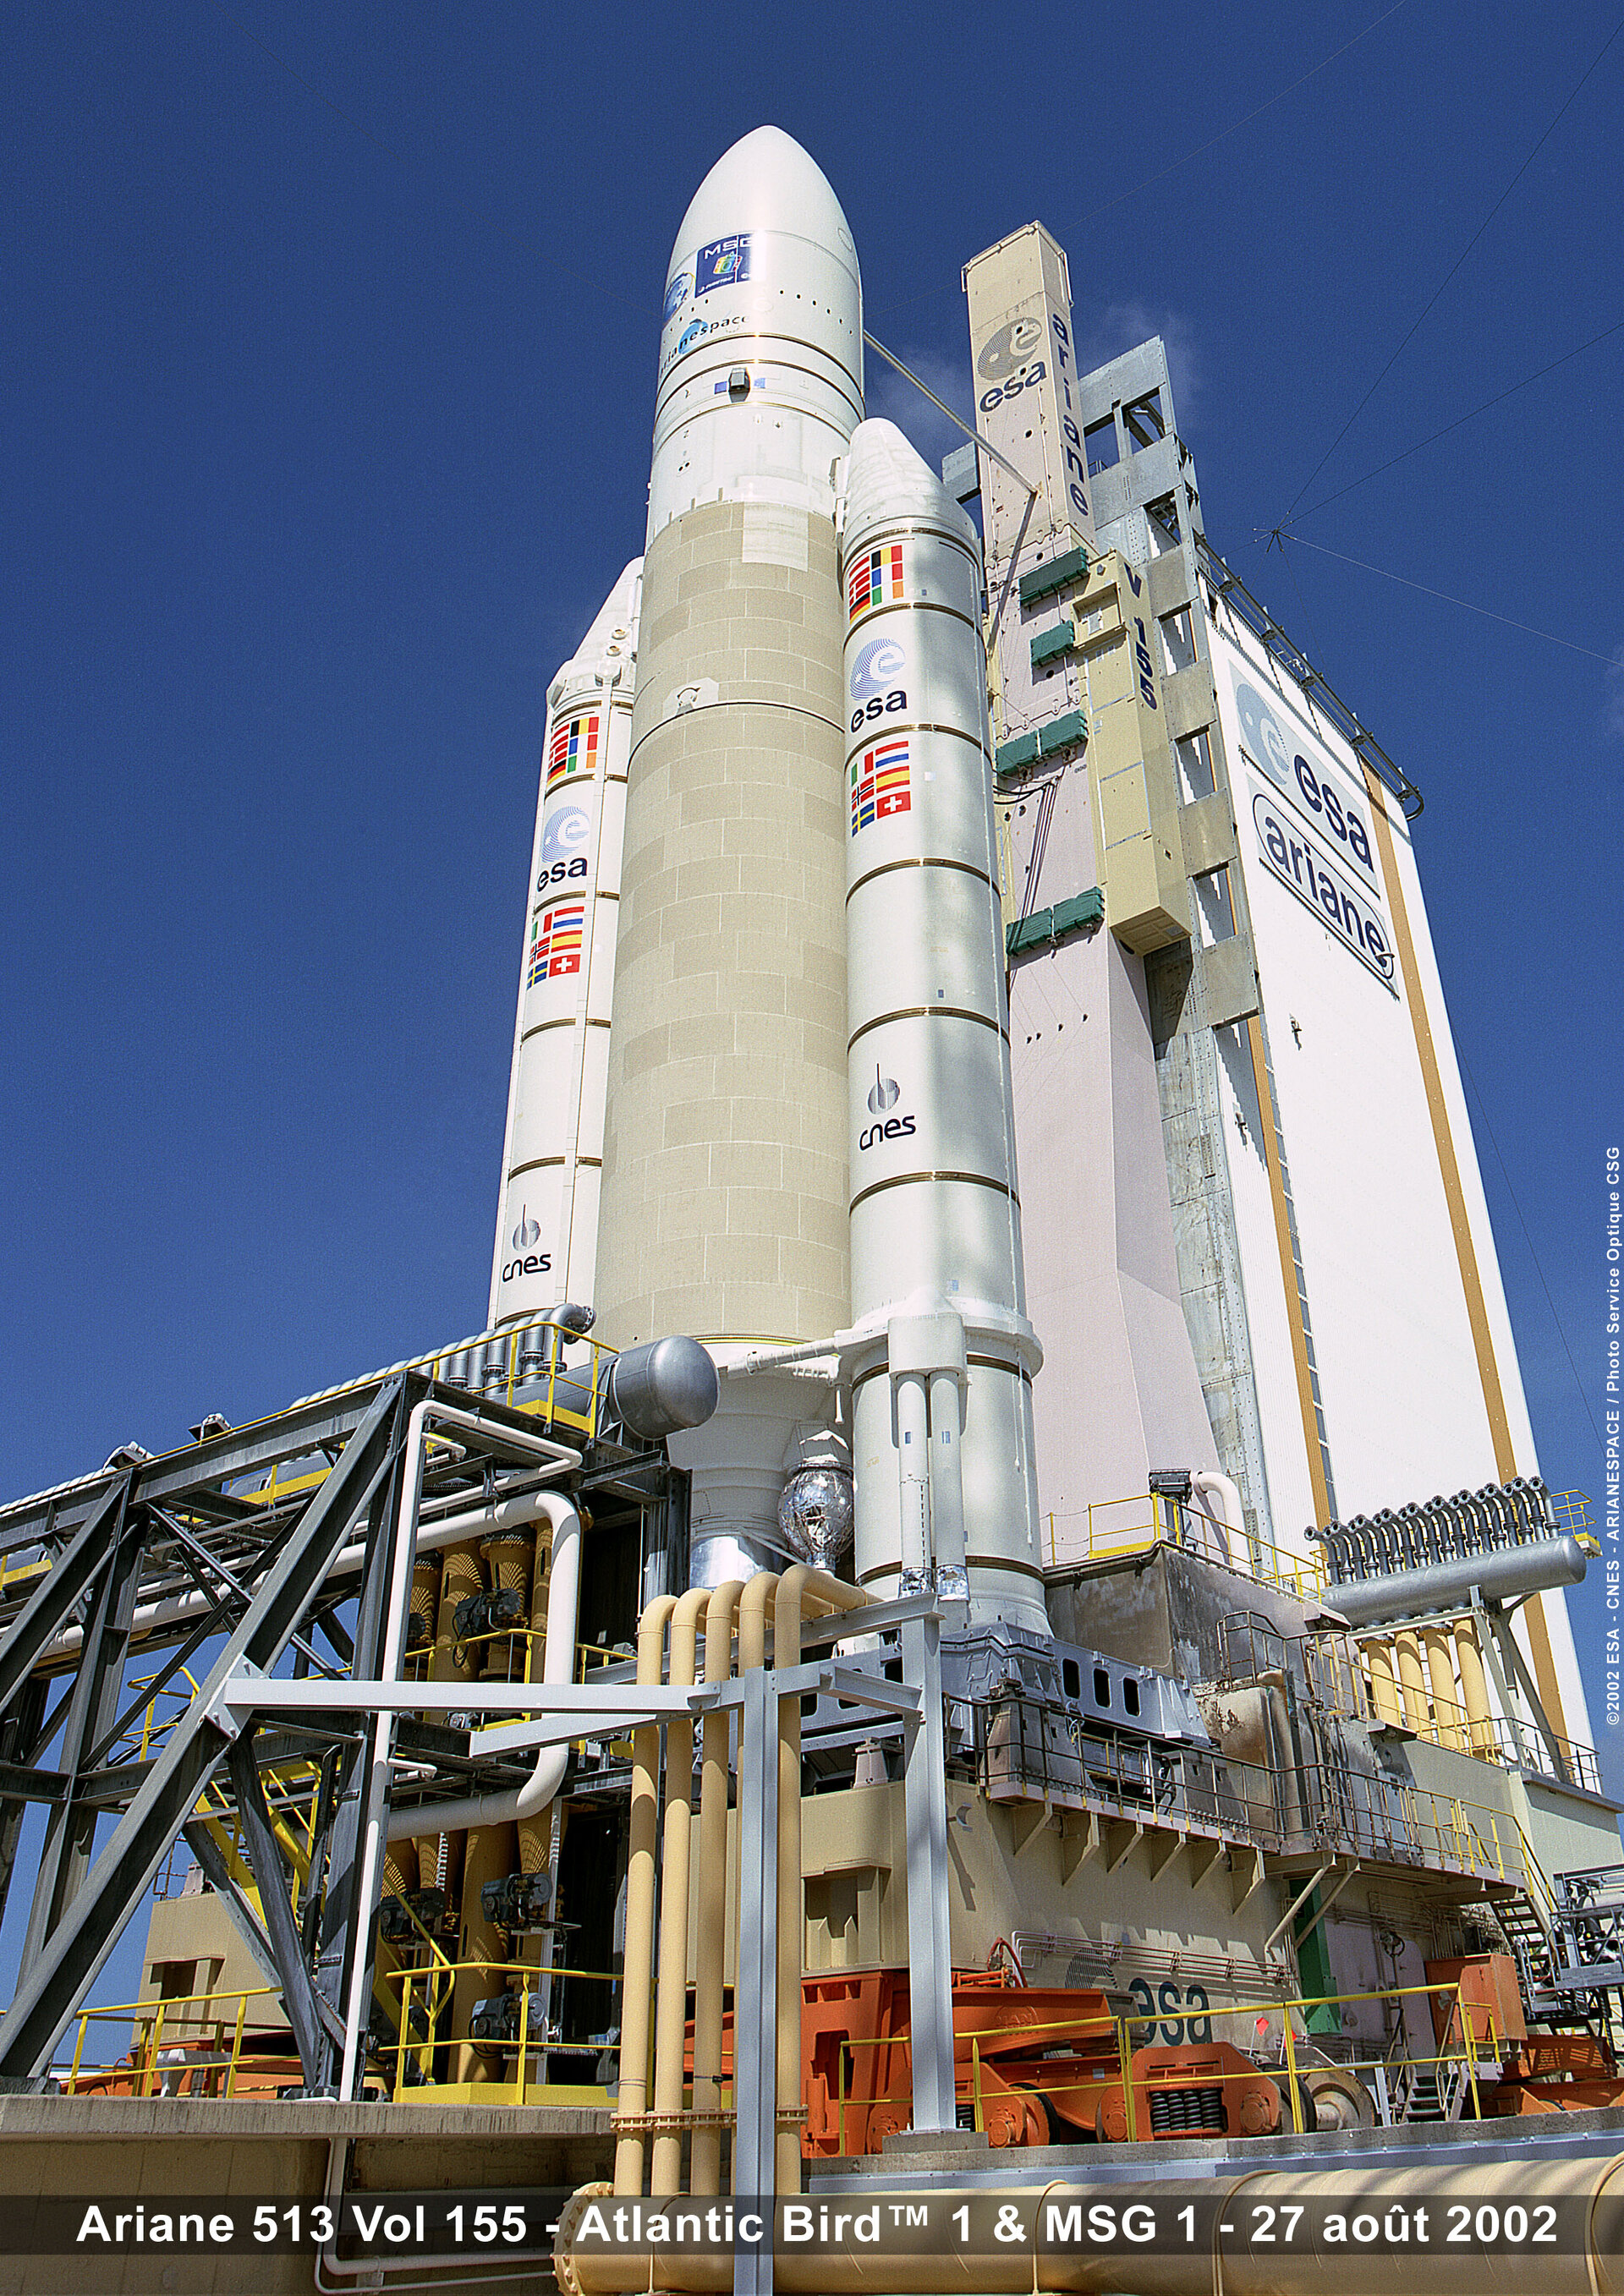 Launcher Ariane 5 on the launch pad